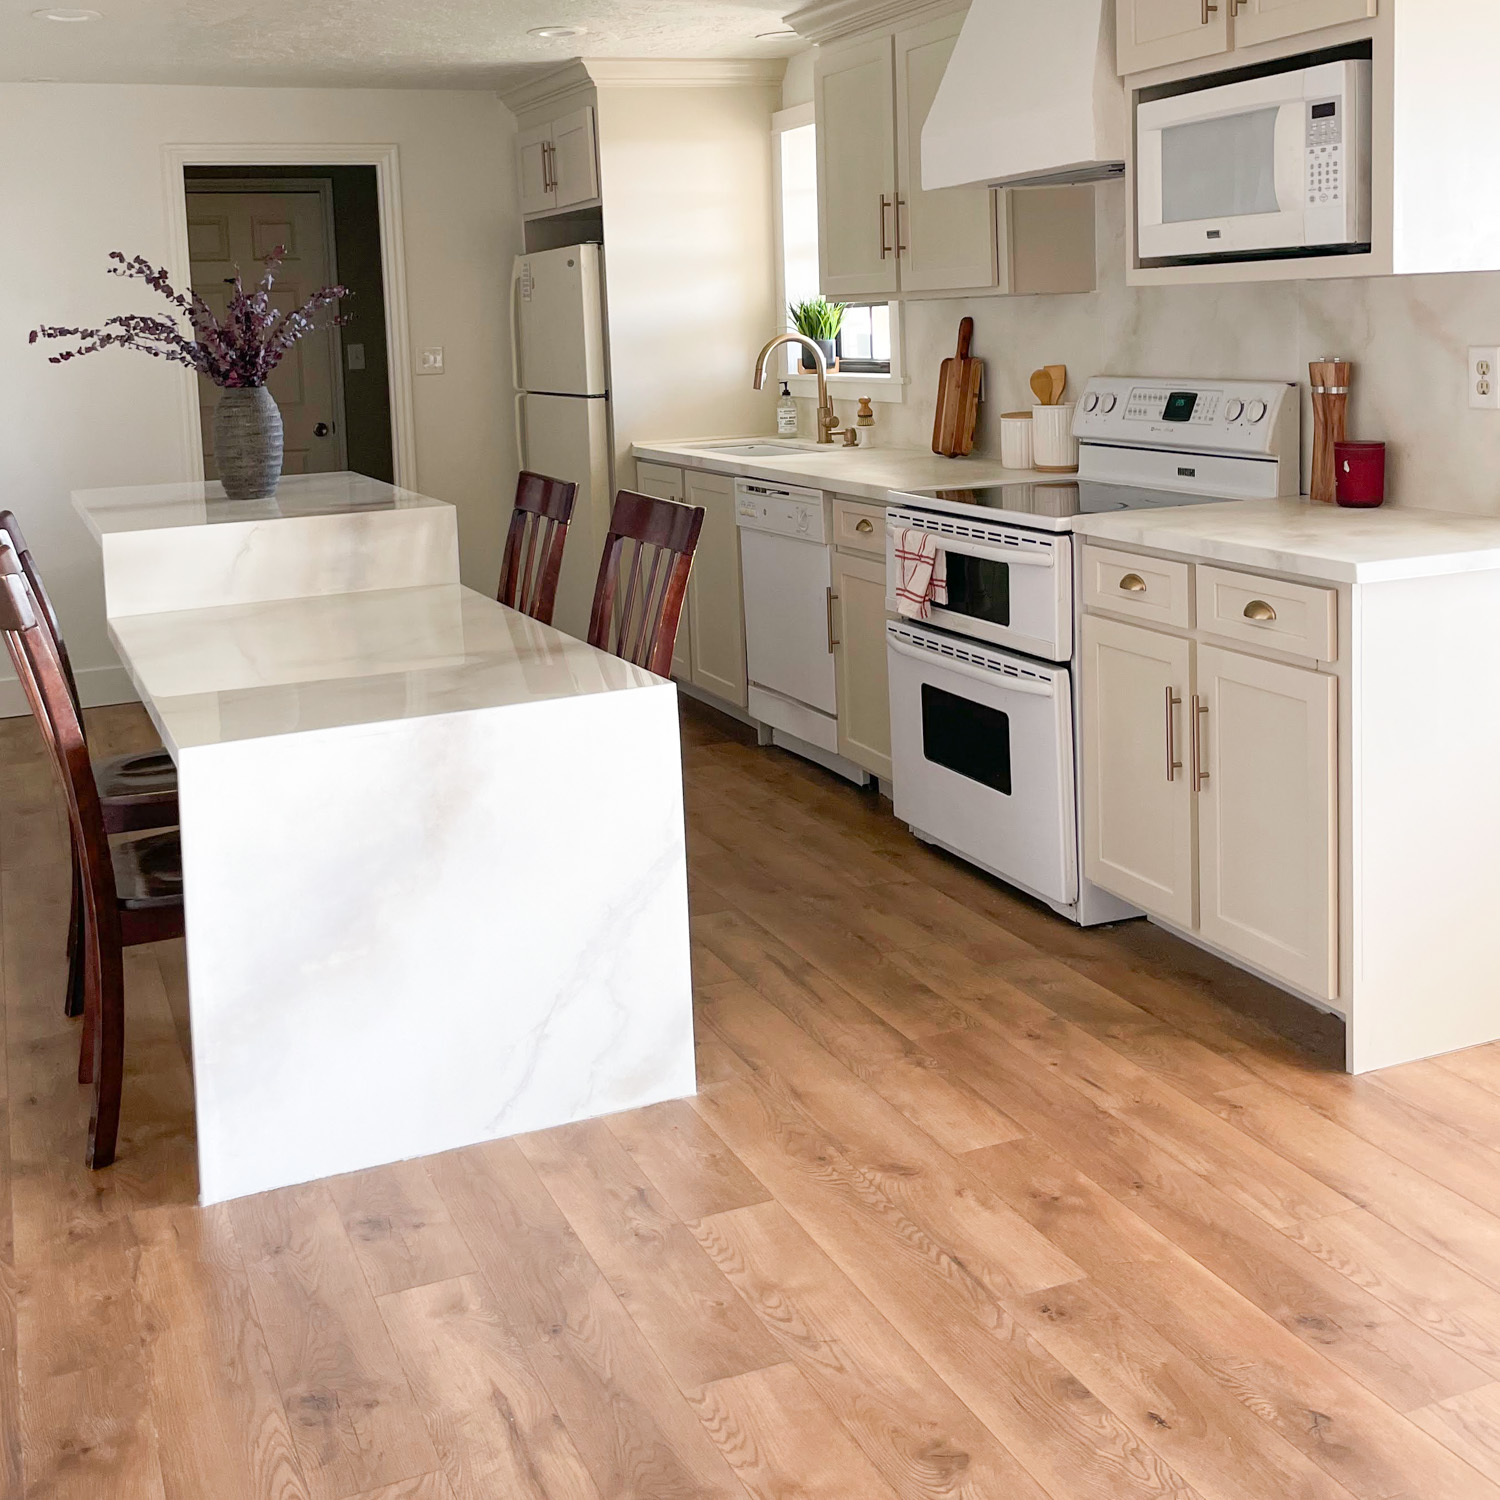 After picture of laminate kitchen flooring.